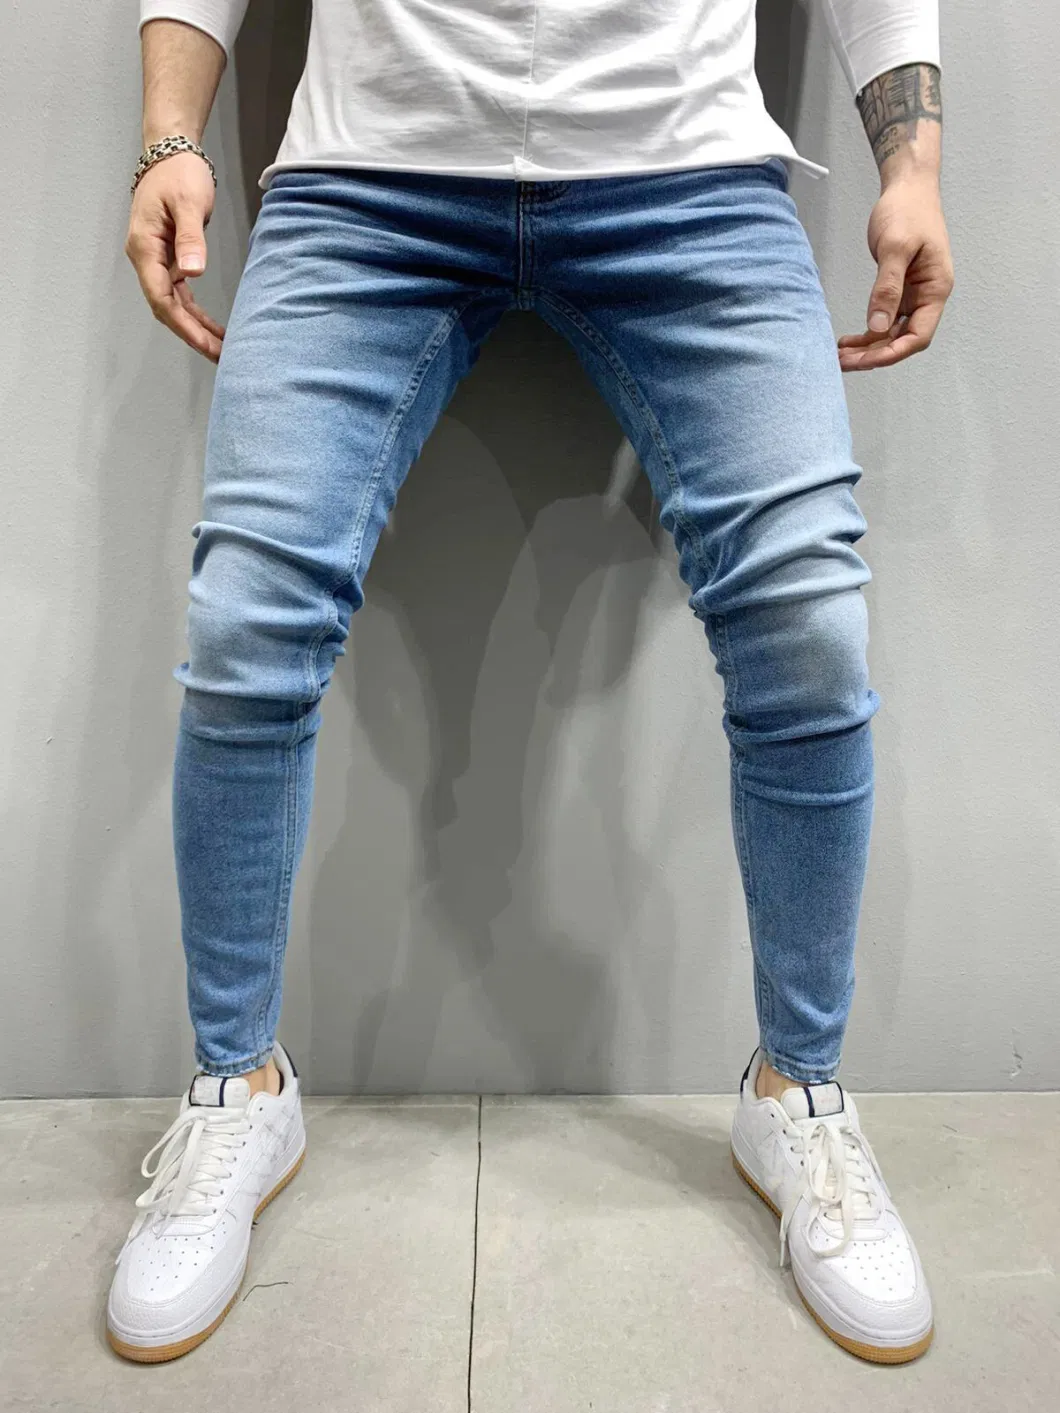 Casual Skinny Jeans Trousers Classica Denim Pants Washed Stretch Jeans for Men